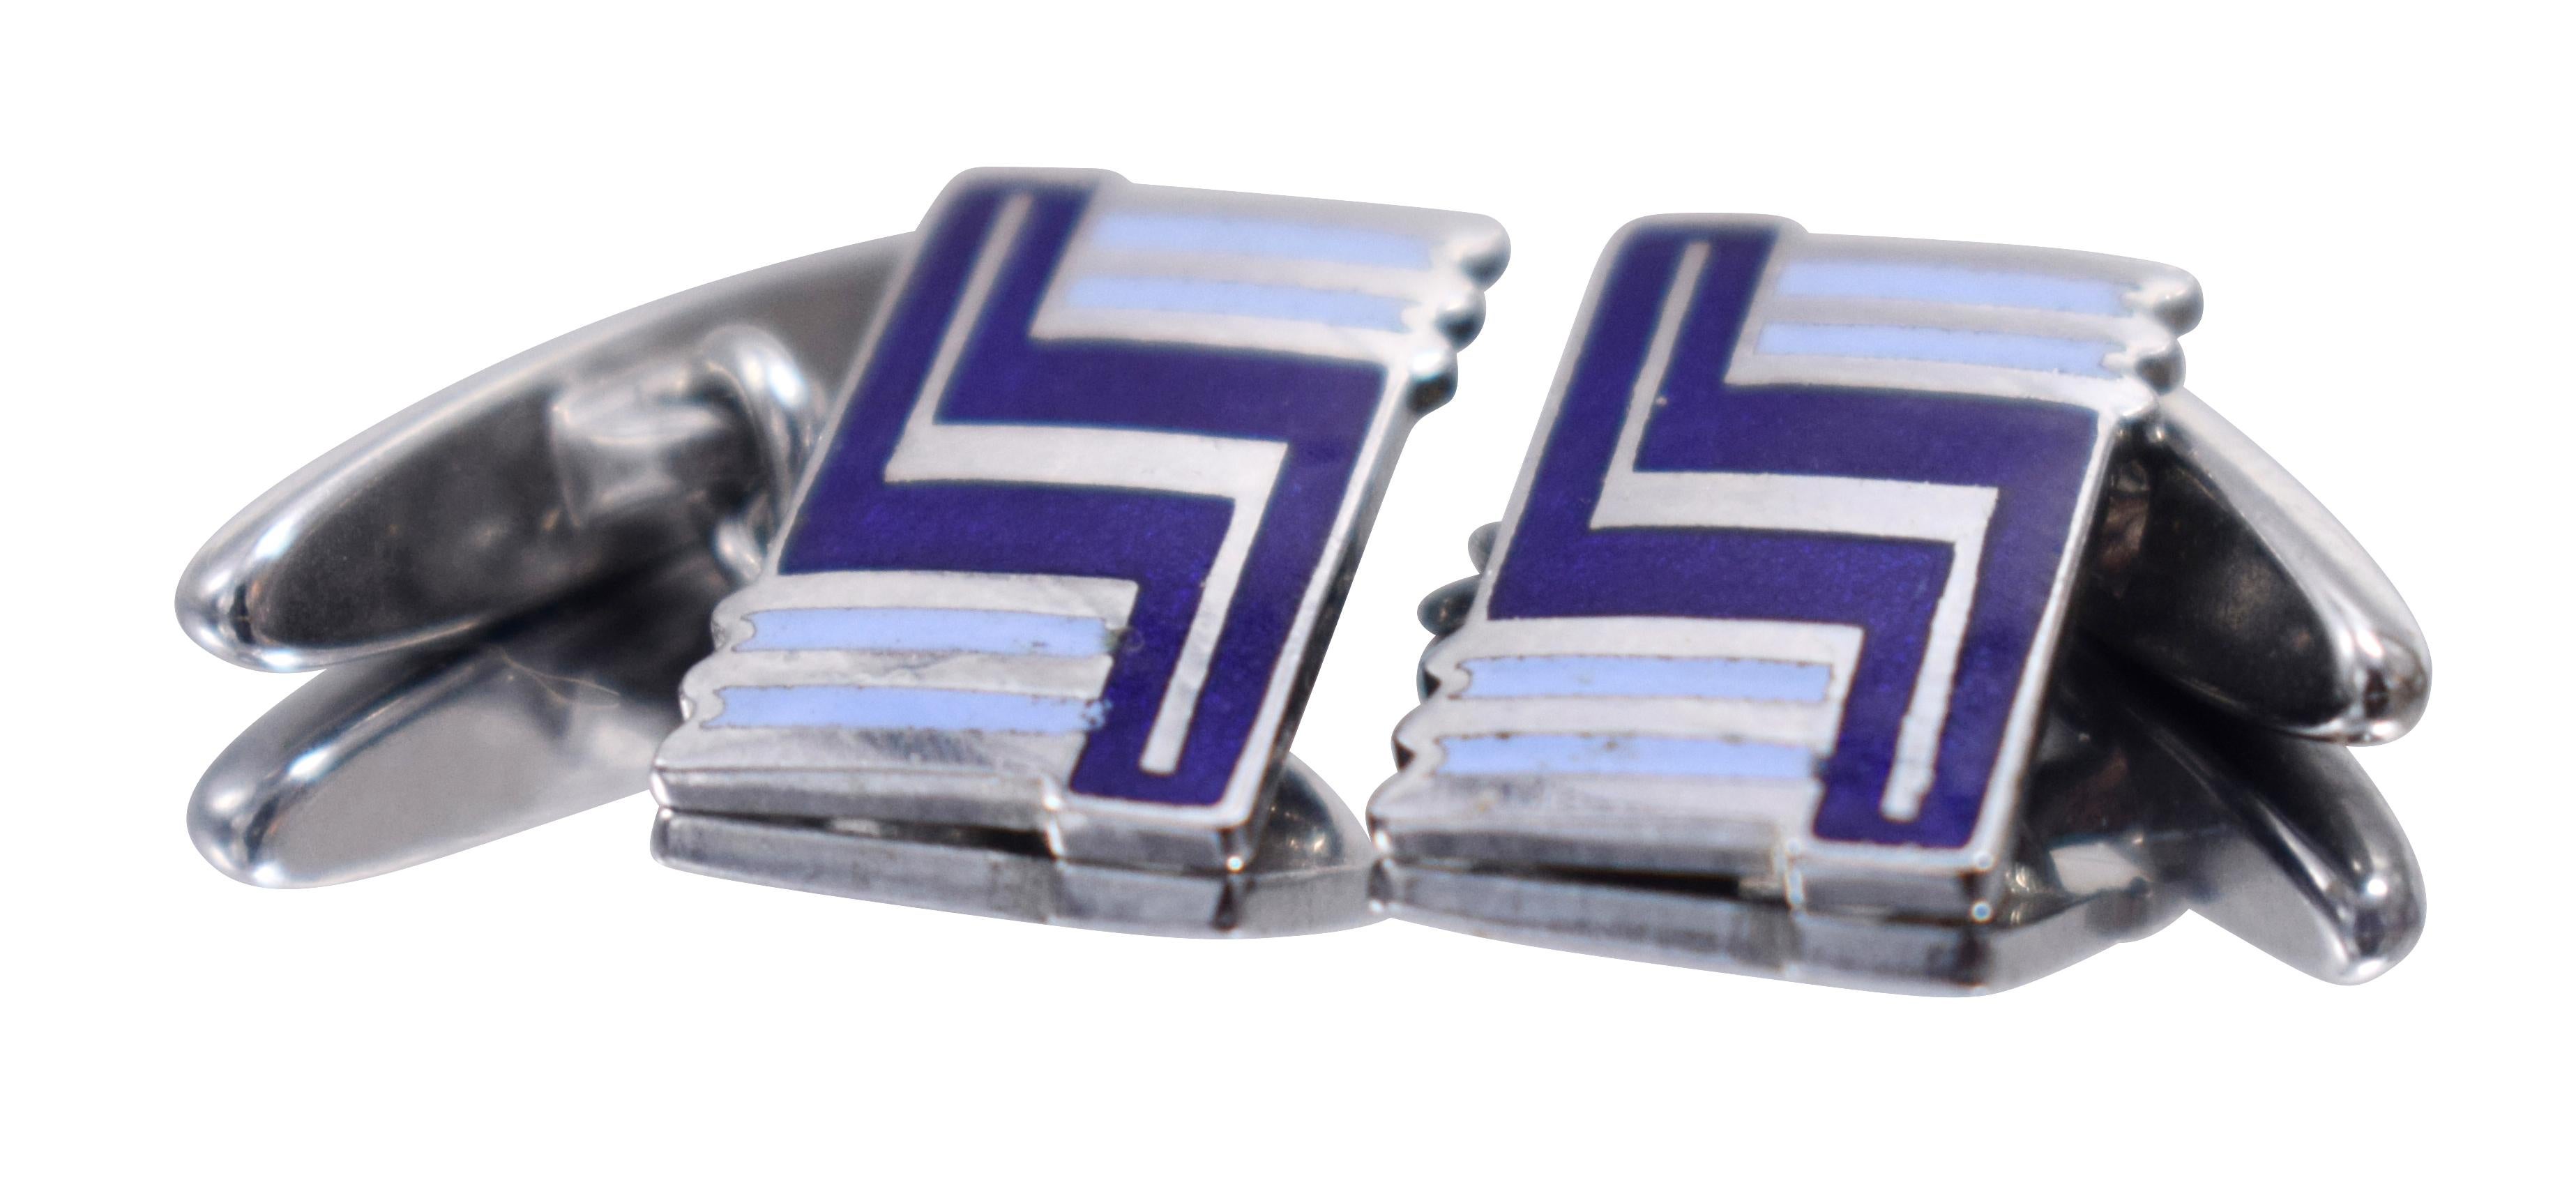 Fabulous pair of matching Art Deco men’s cufflinks with a great geometric pattern. Silver toned metal with blue enamel decoration and dating to the 1930's. Condition is great with no wear at all. Ideal for the modern dapper gentleman. 
All our